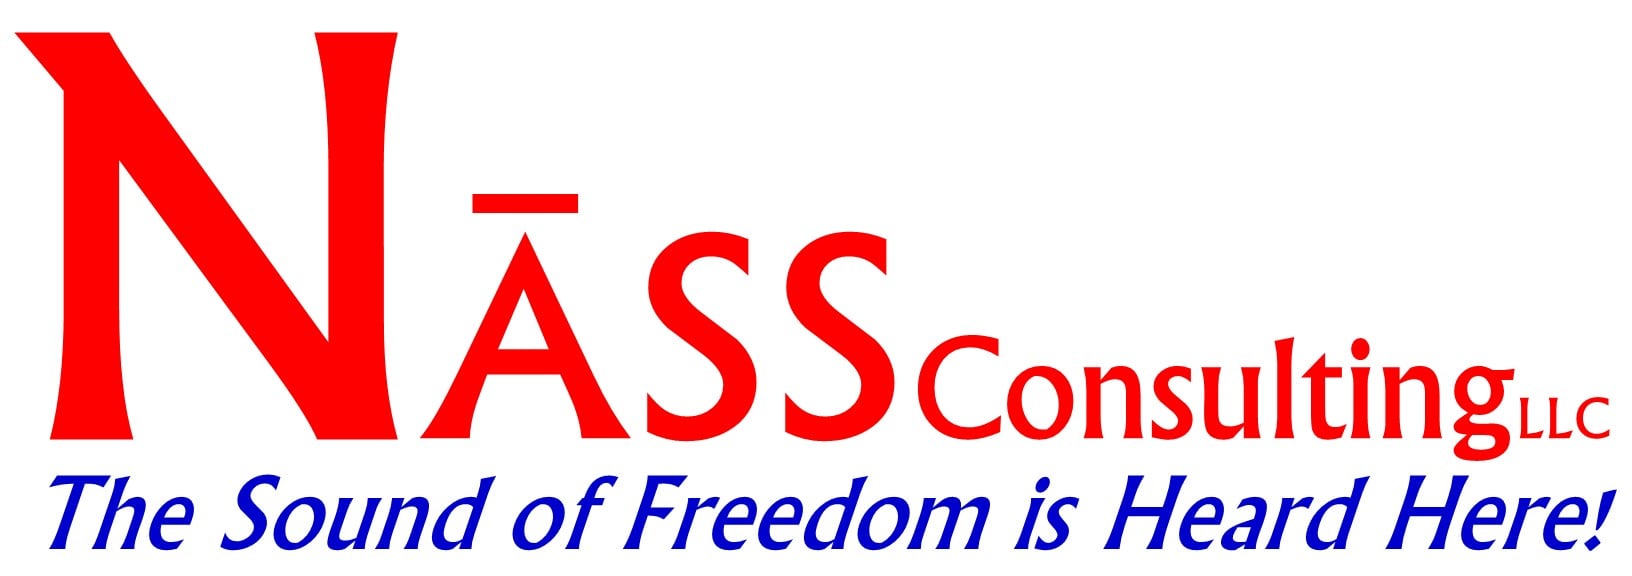 Nass Consulting LLC